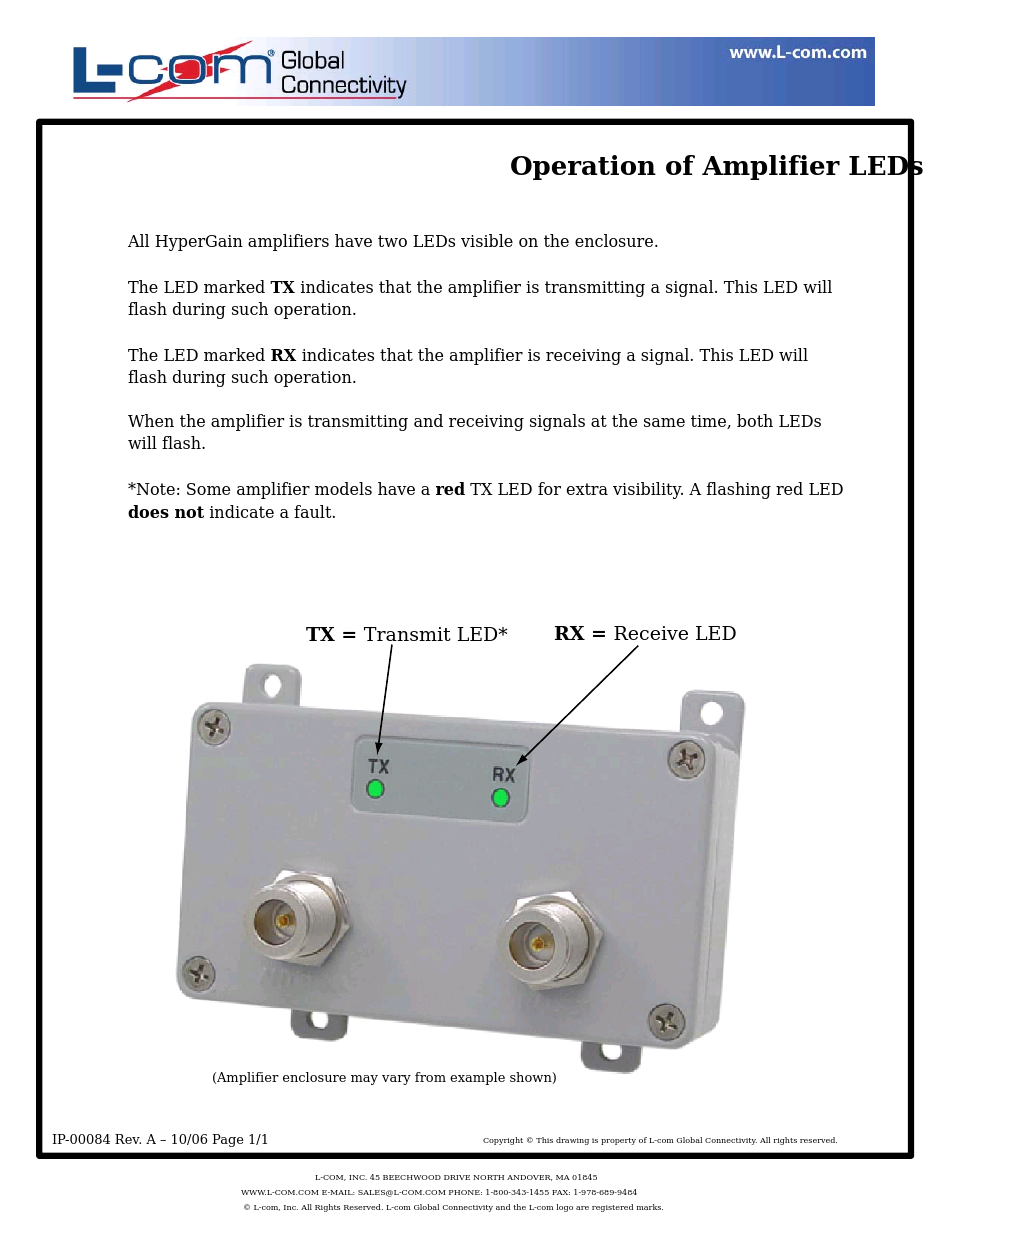 Operation of Amplifier LEDs